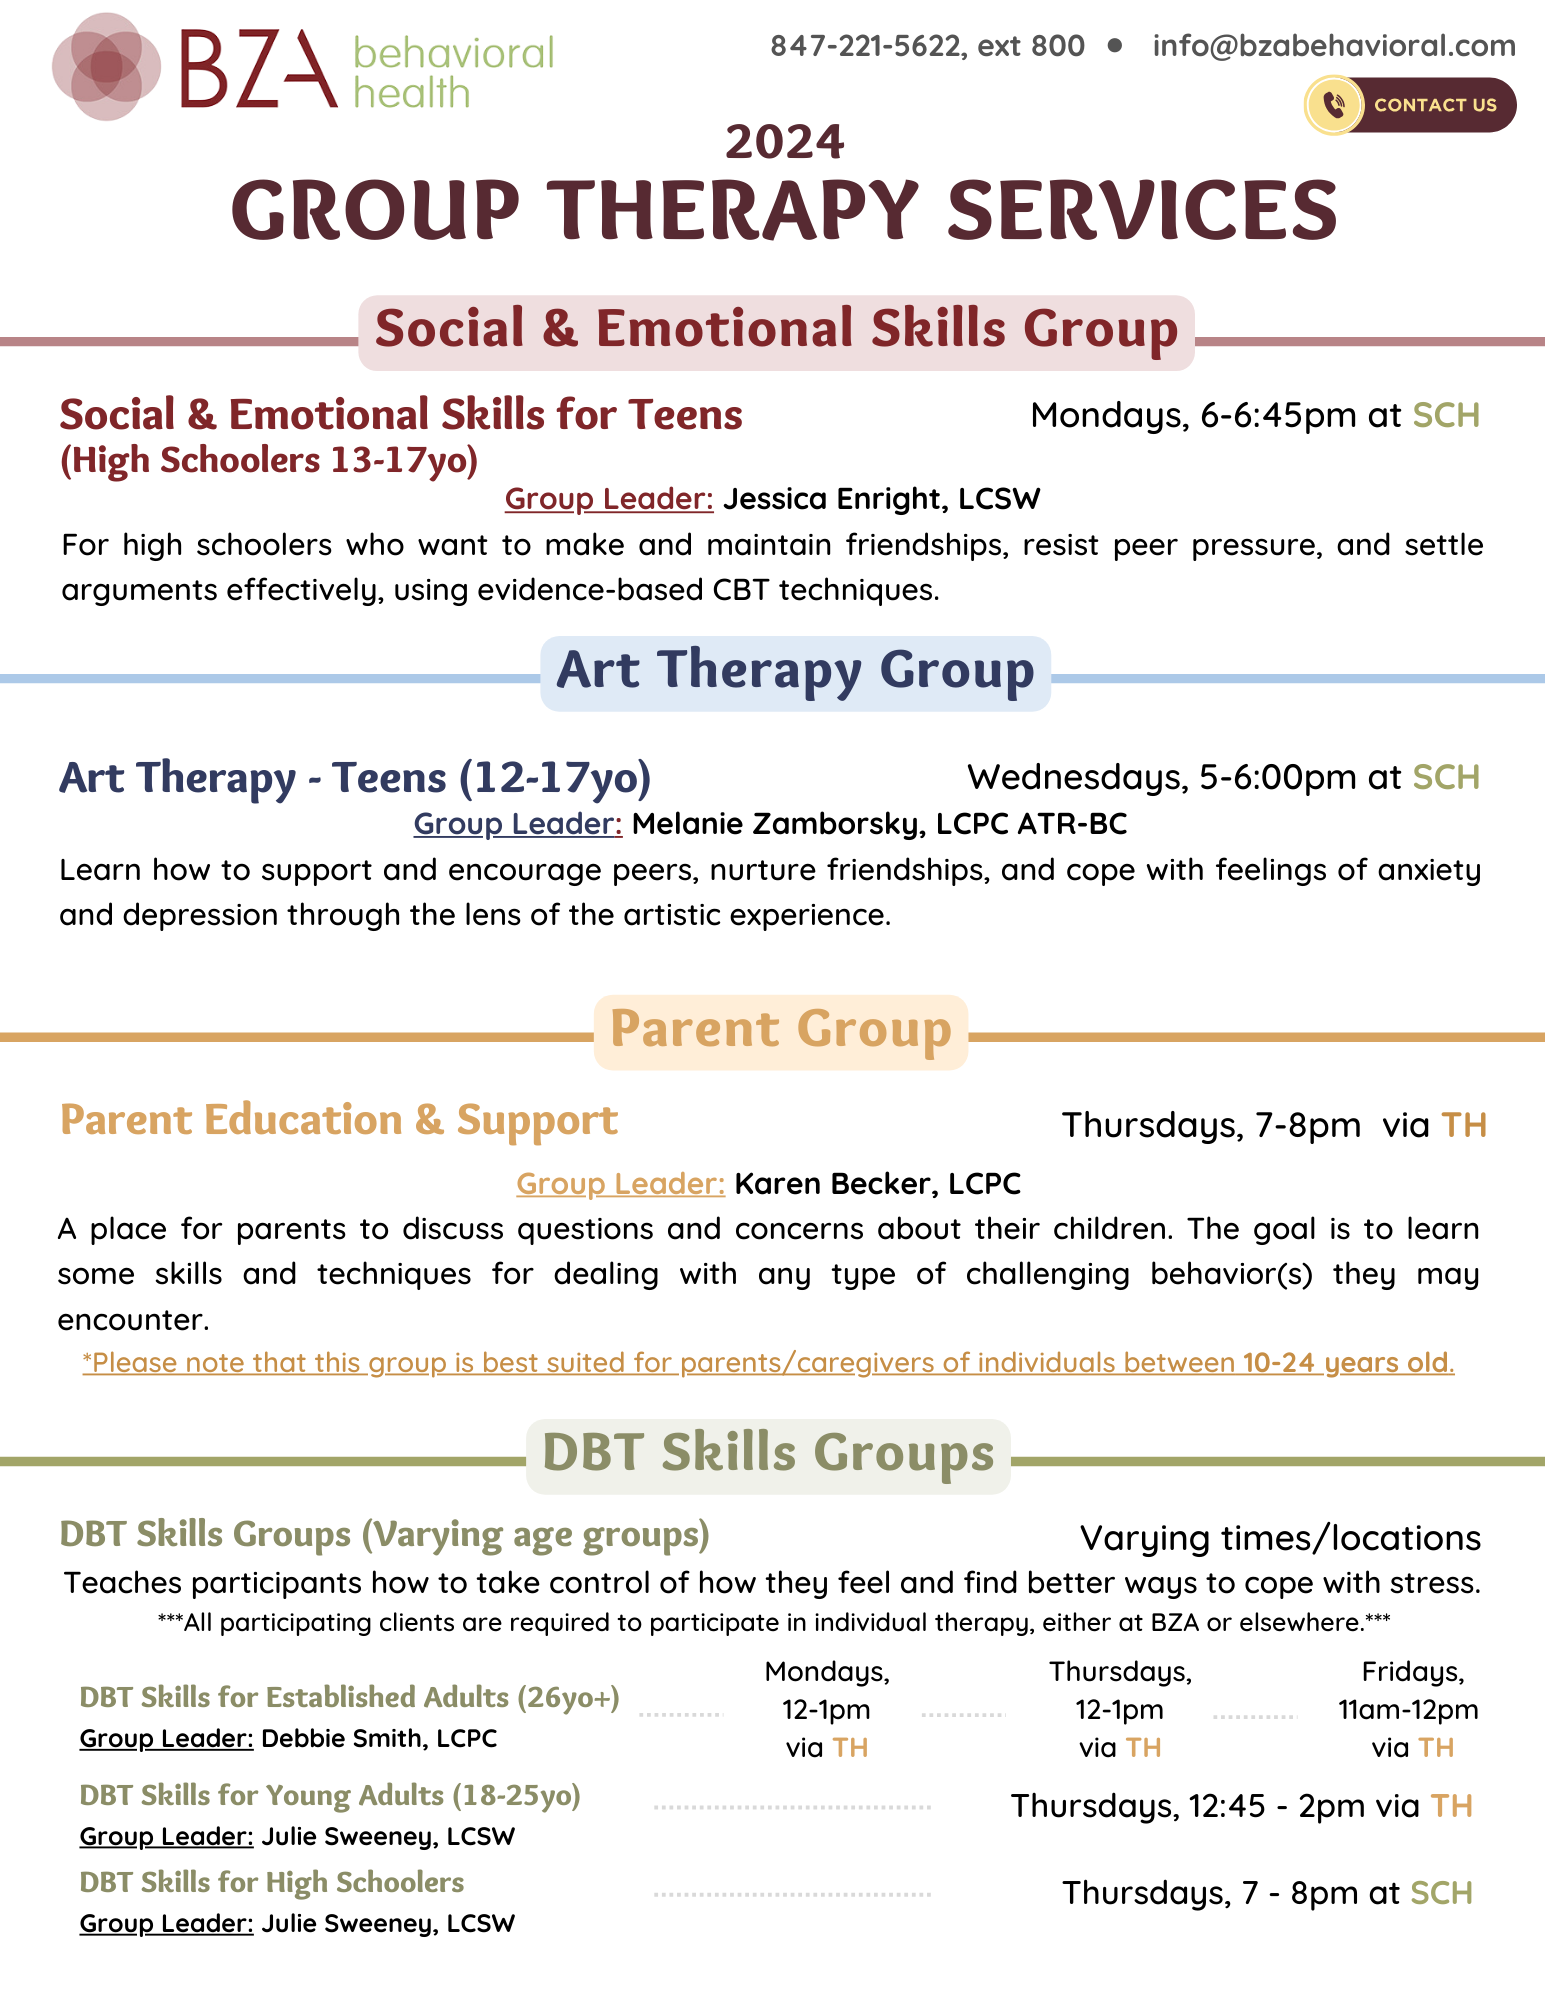 group therapy services 